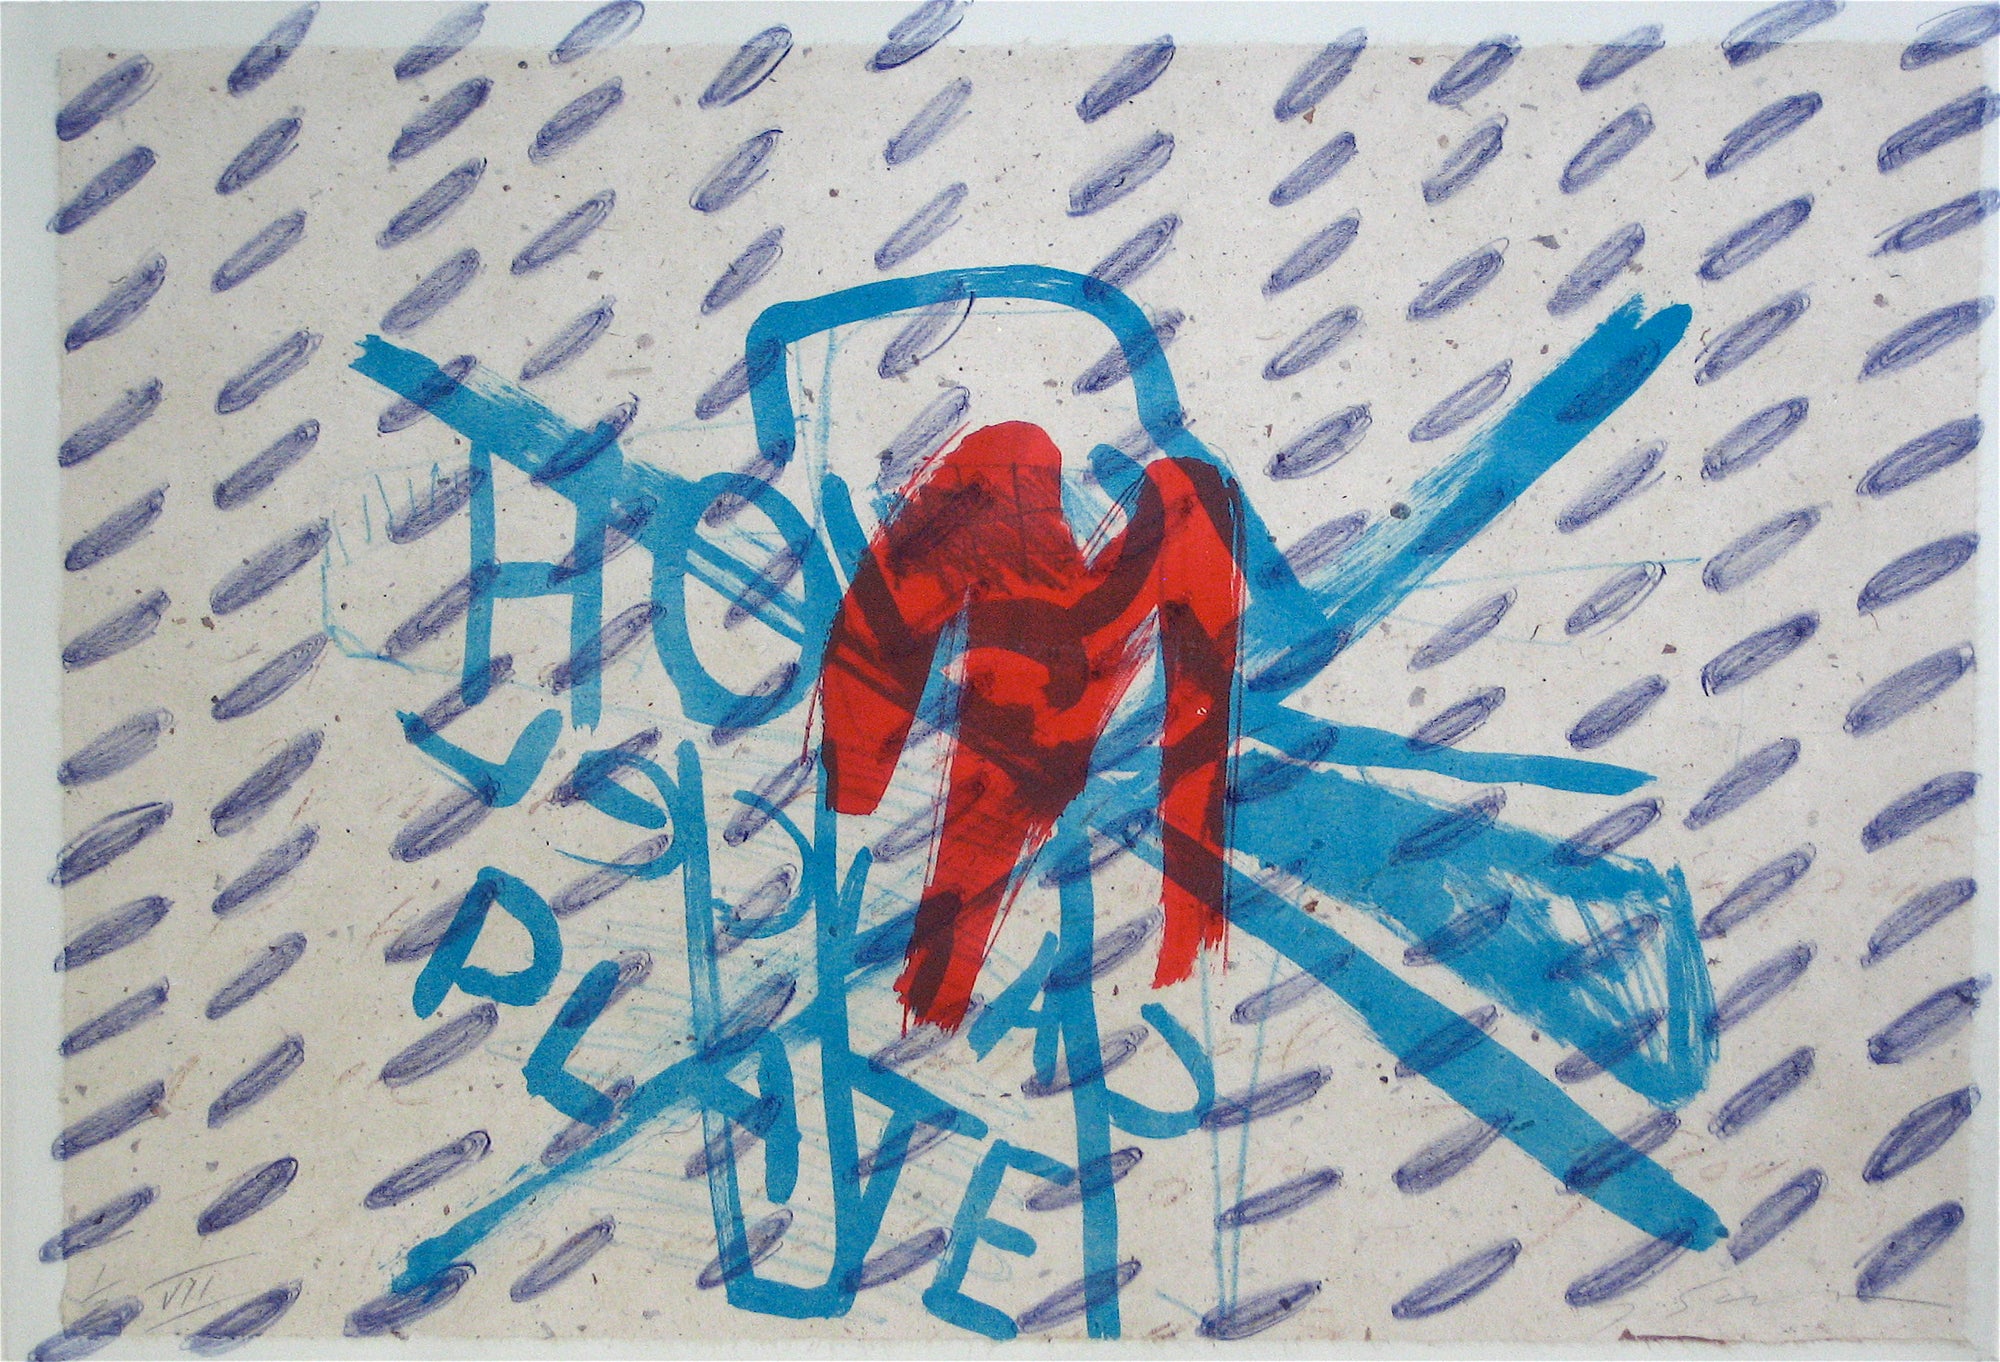 Abstract Print with Blue Pattern <br>1999-2000 Lithograph and Chine Colle<br><br>#11700